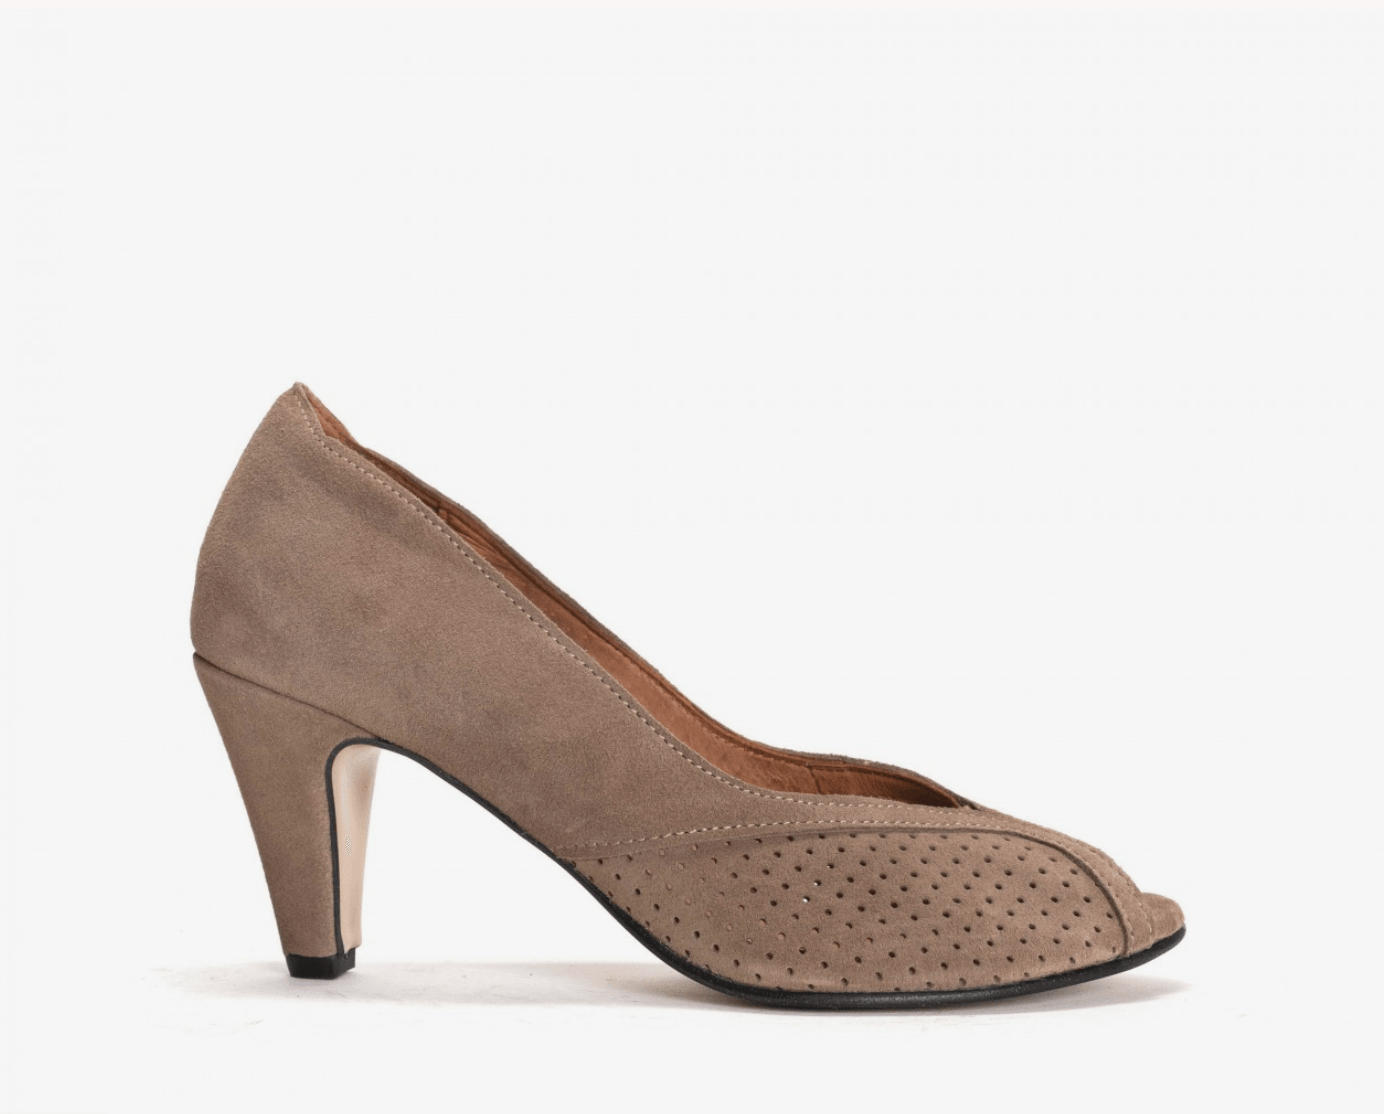 This style features eyelet details, taupe coloured suede outer, a modern shape court heel and peep-toe. Made in Portugal. Material 100% Italian calf suede leather. Shop Made the Edit for beautifully crafted footwear for women. UK stockist.